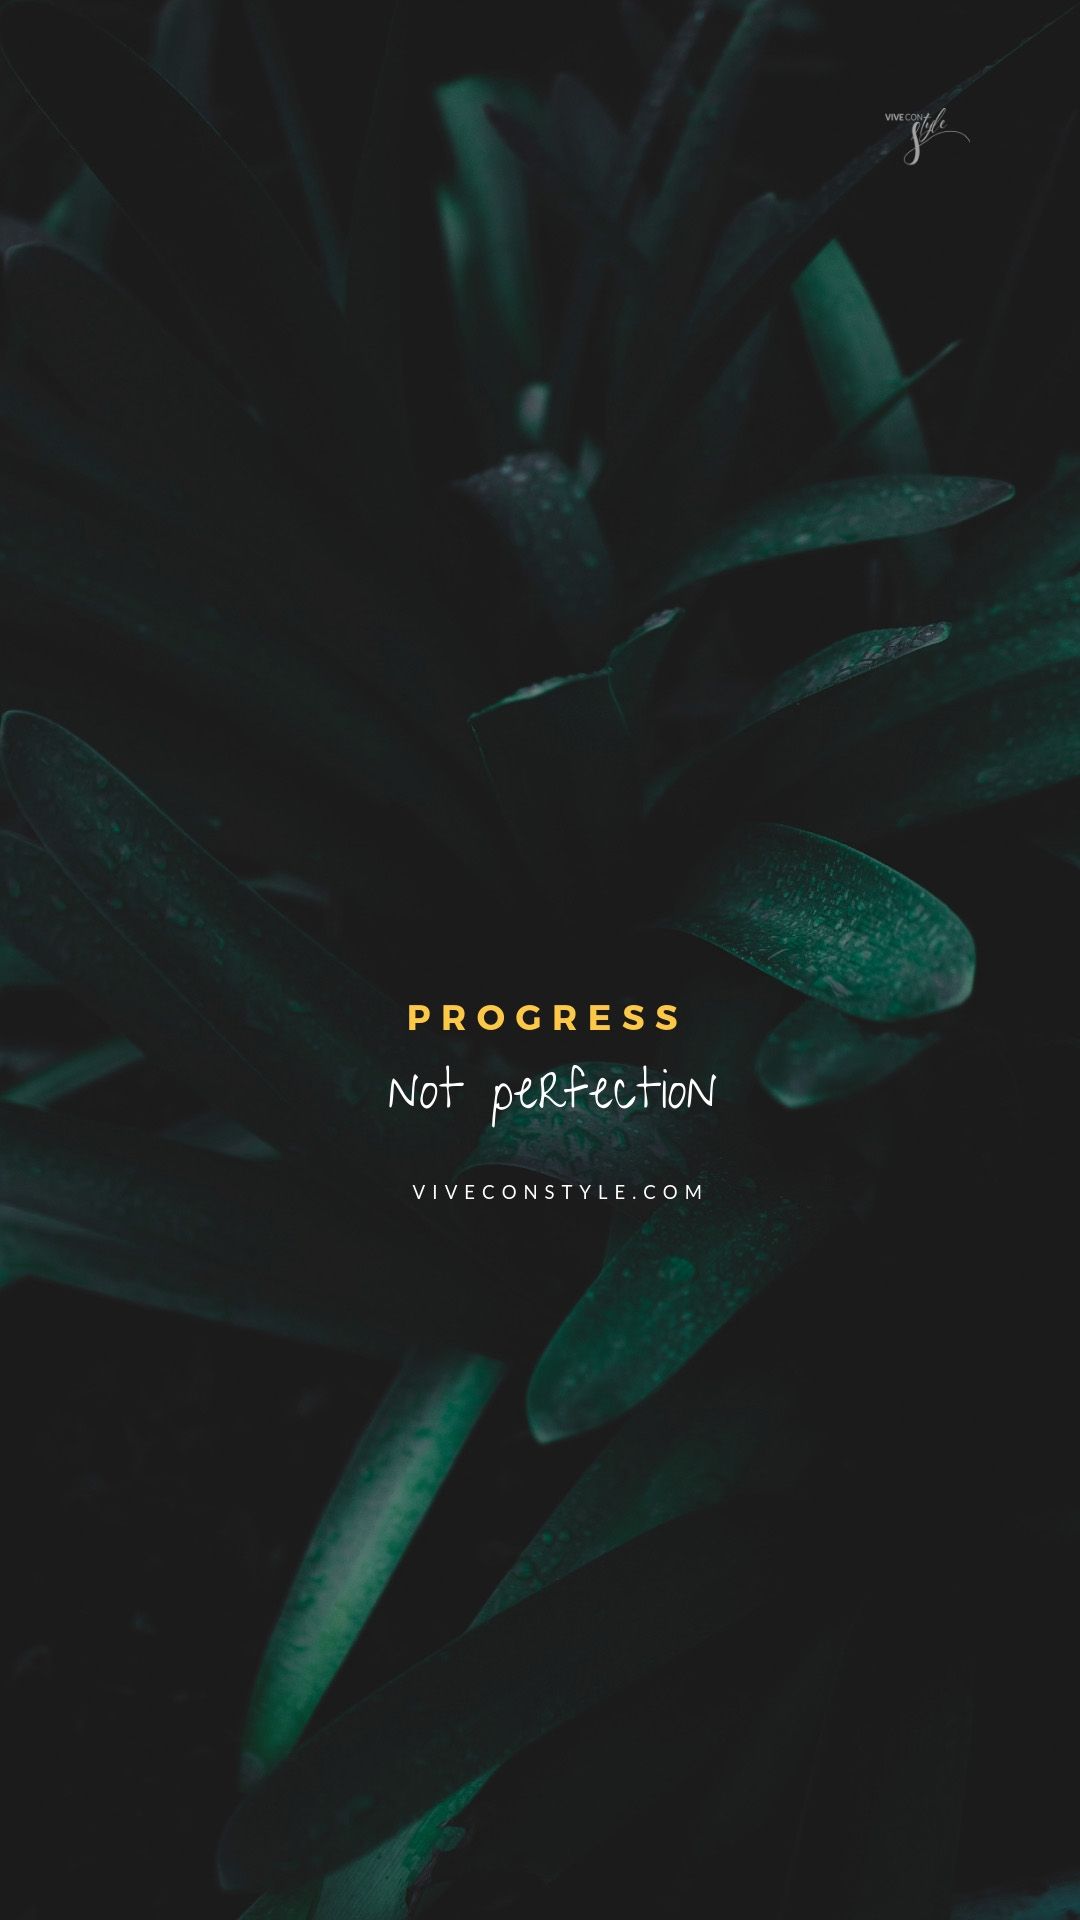 Progress not perfection CON STYLE